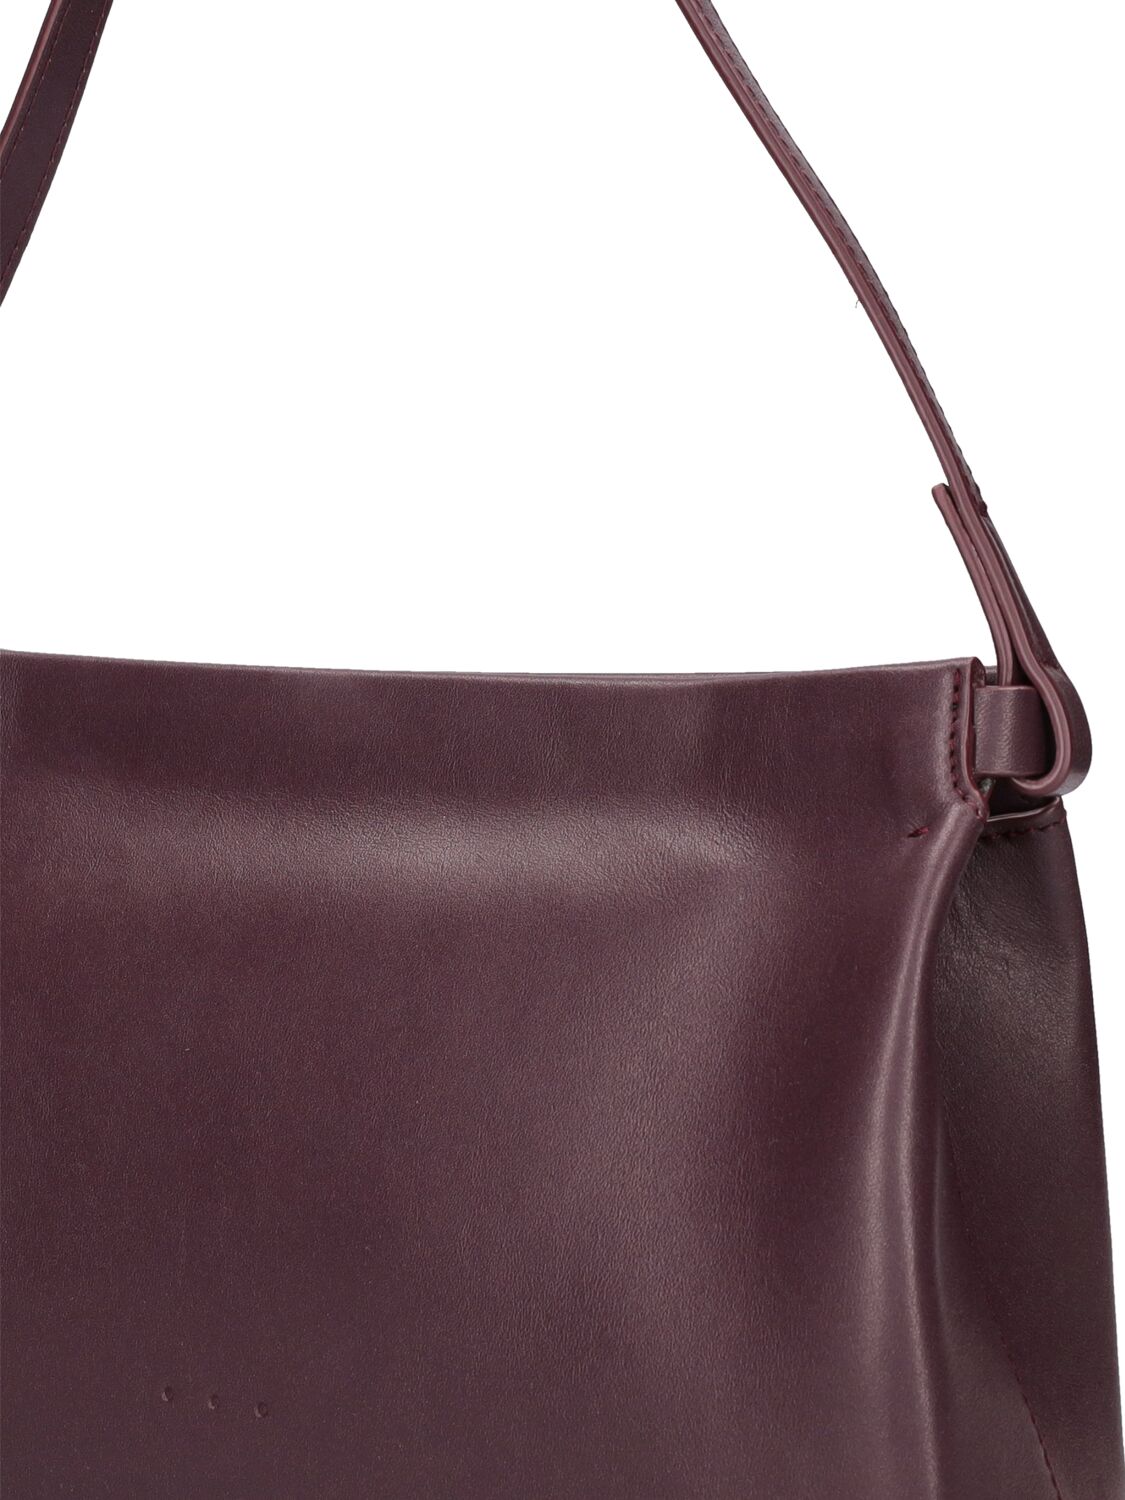 Sway leather tote bag - Aesther Ekme - Women